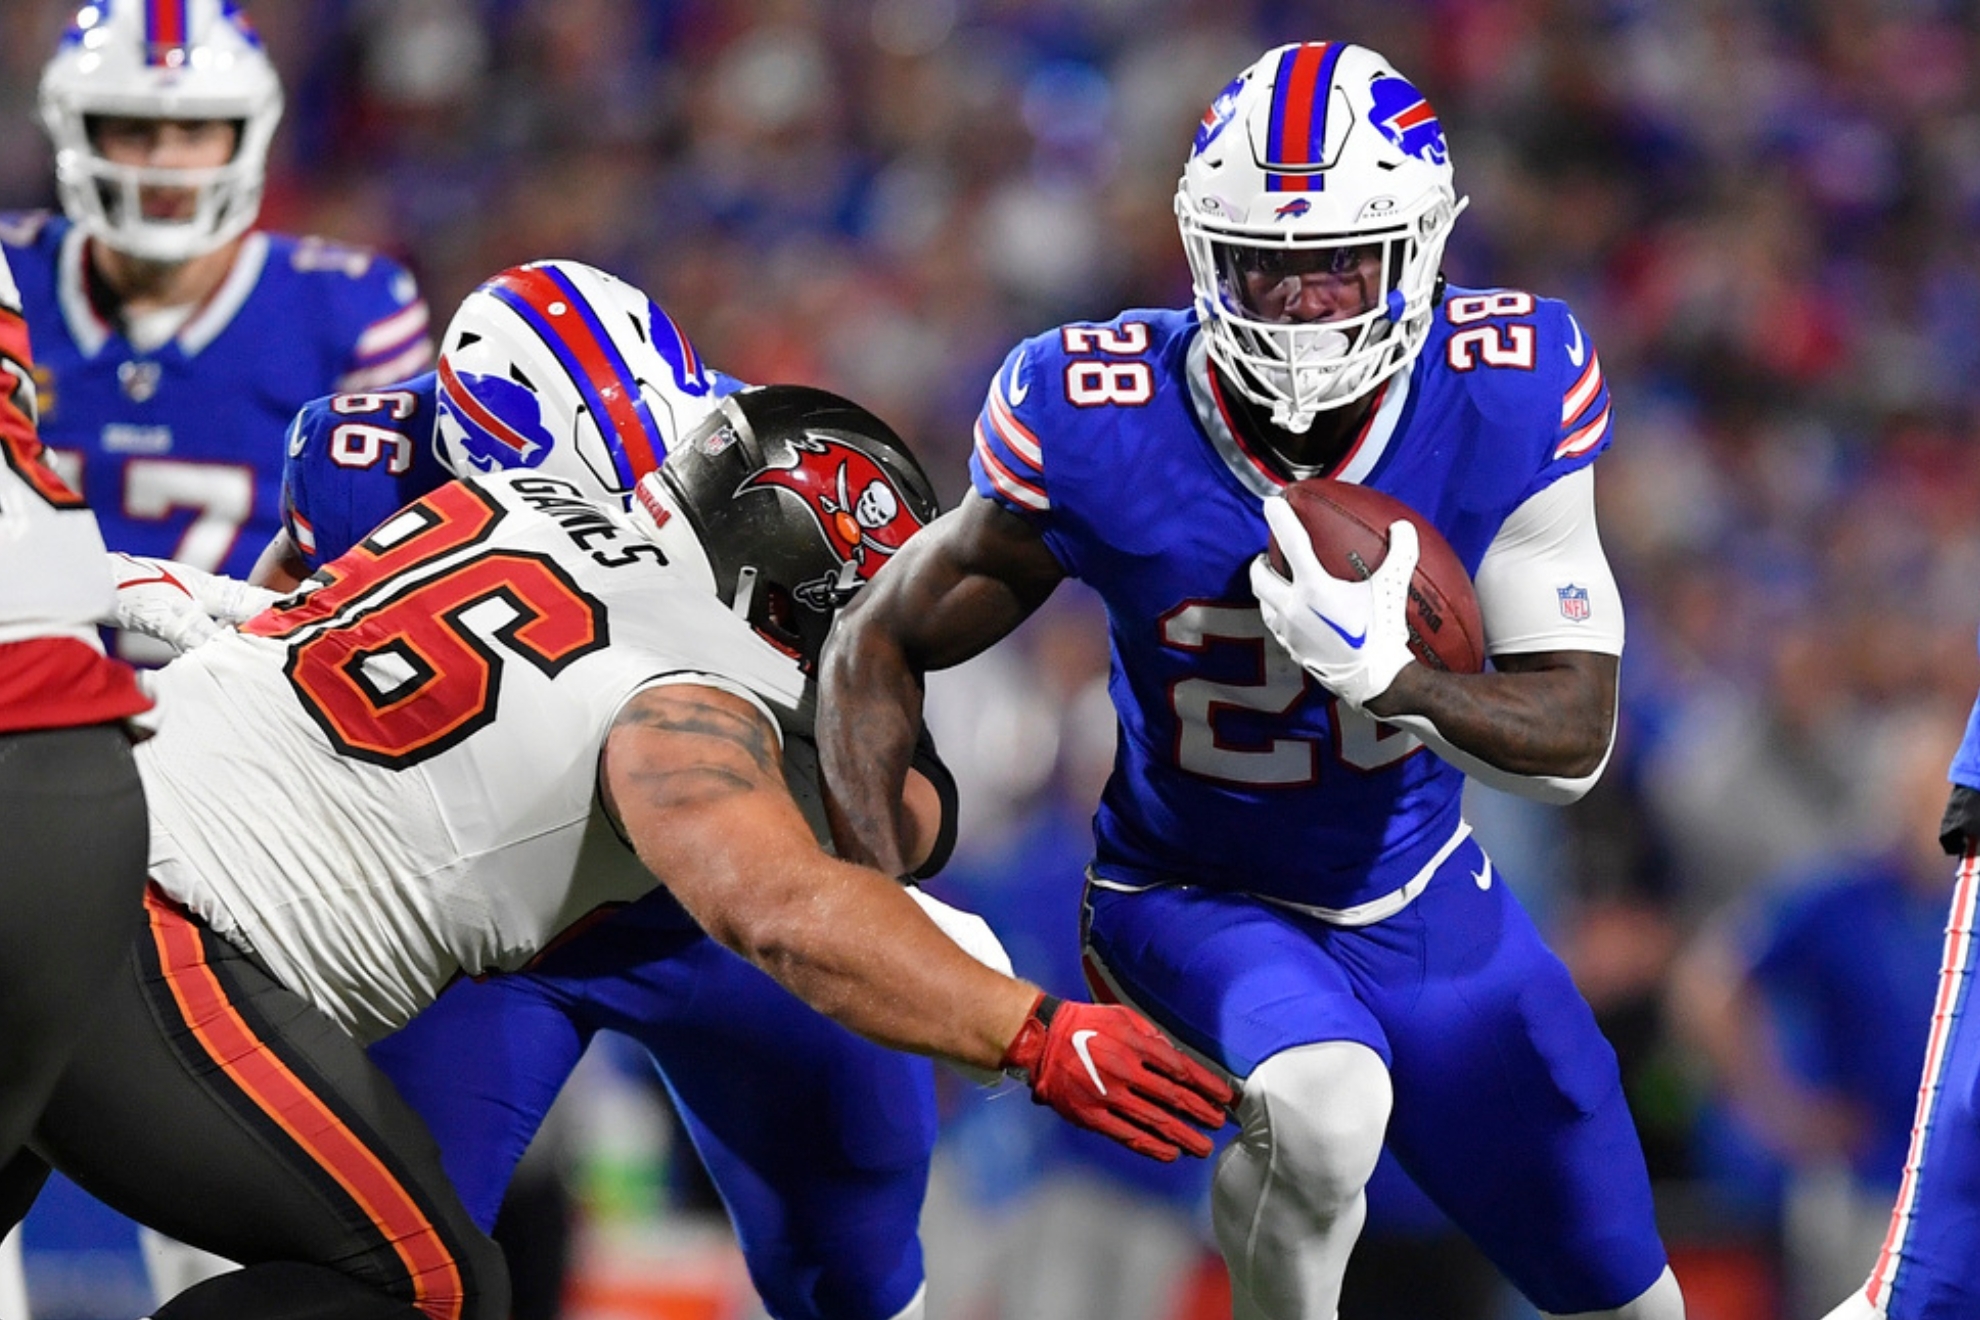 The Bills have fallen to 5-4 and are in a race to make playoffs